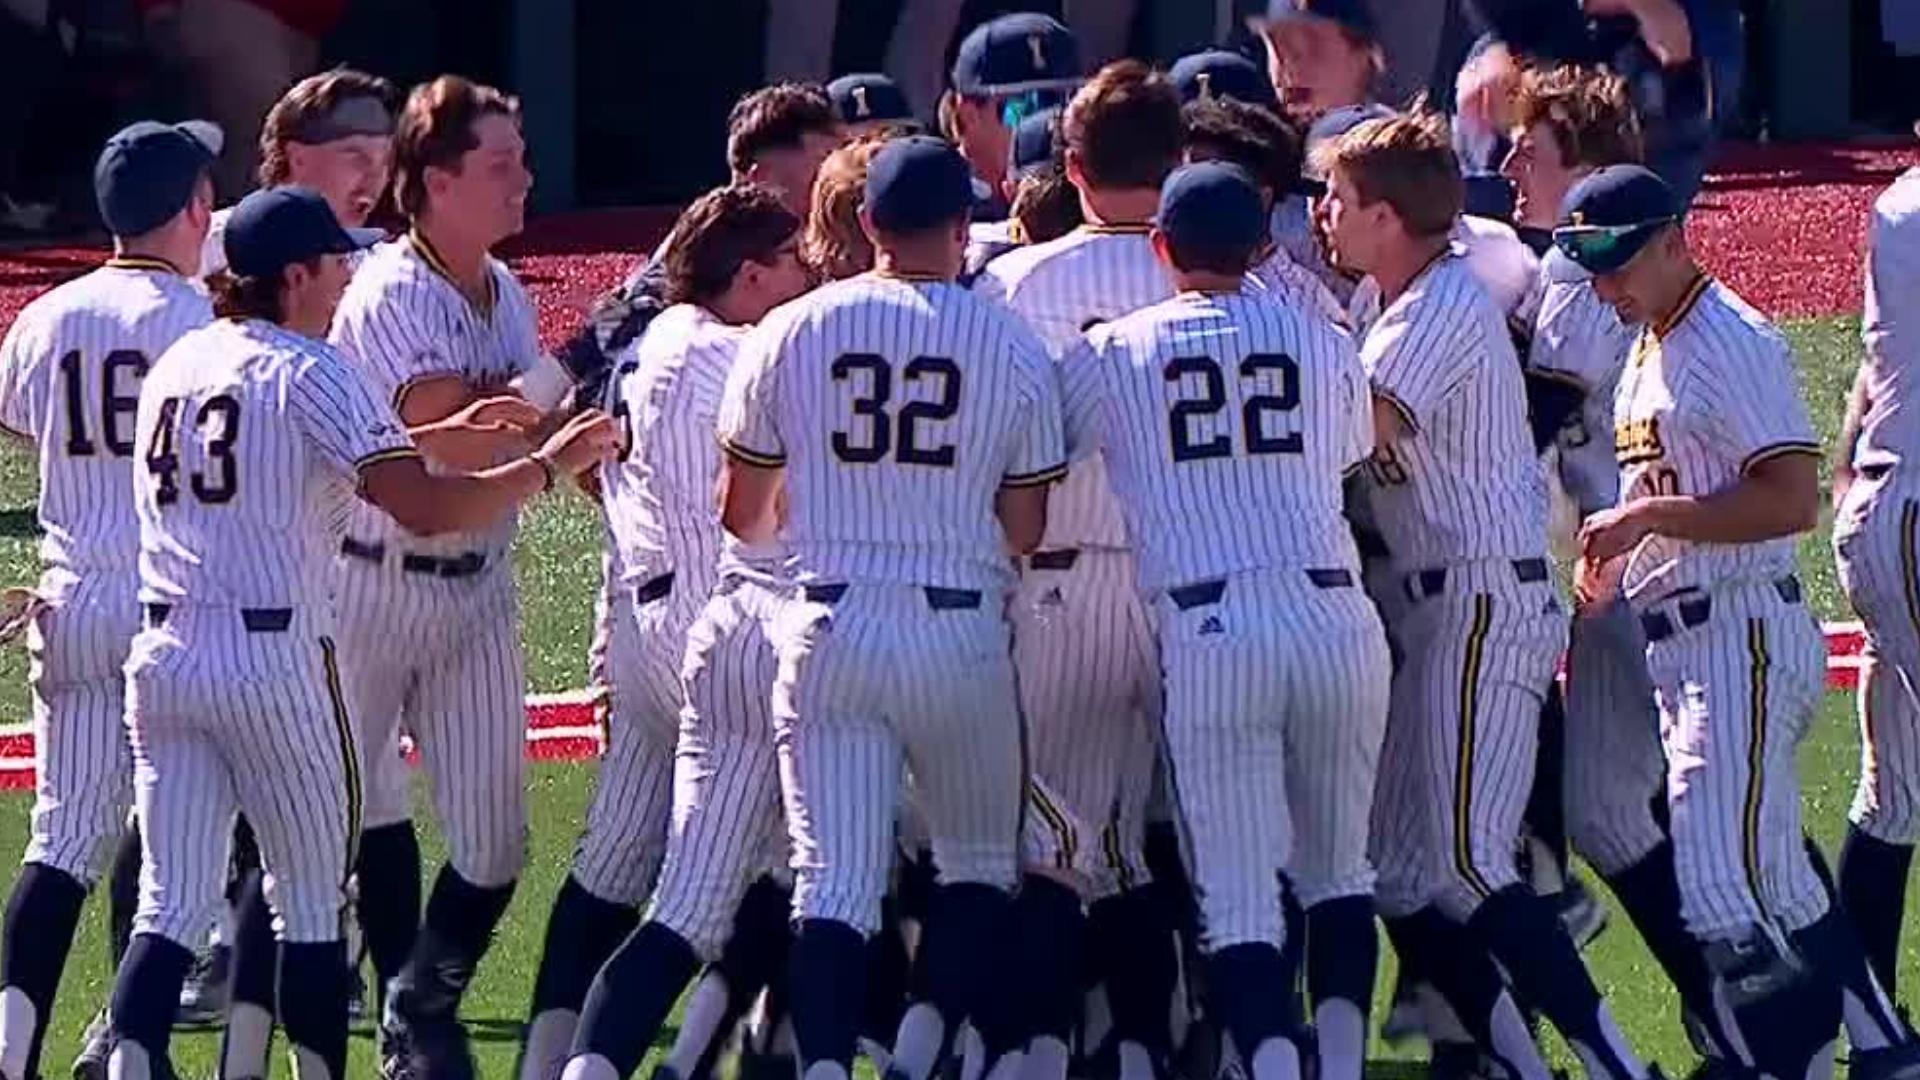 UC Irvine walks it off after blowing 9-1 lead